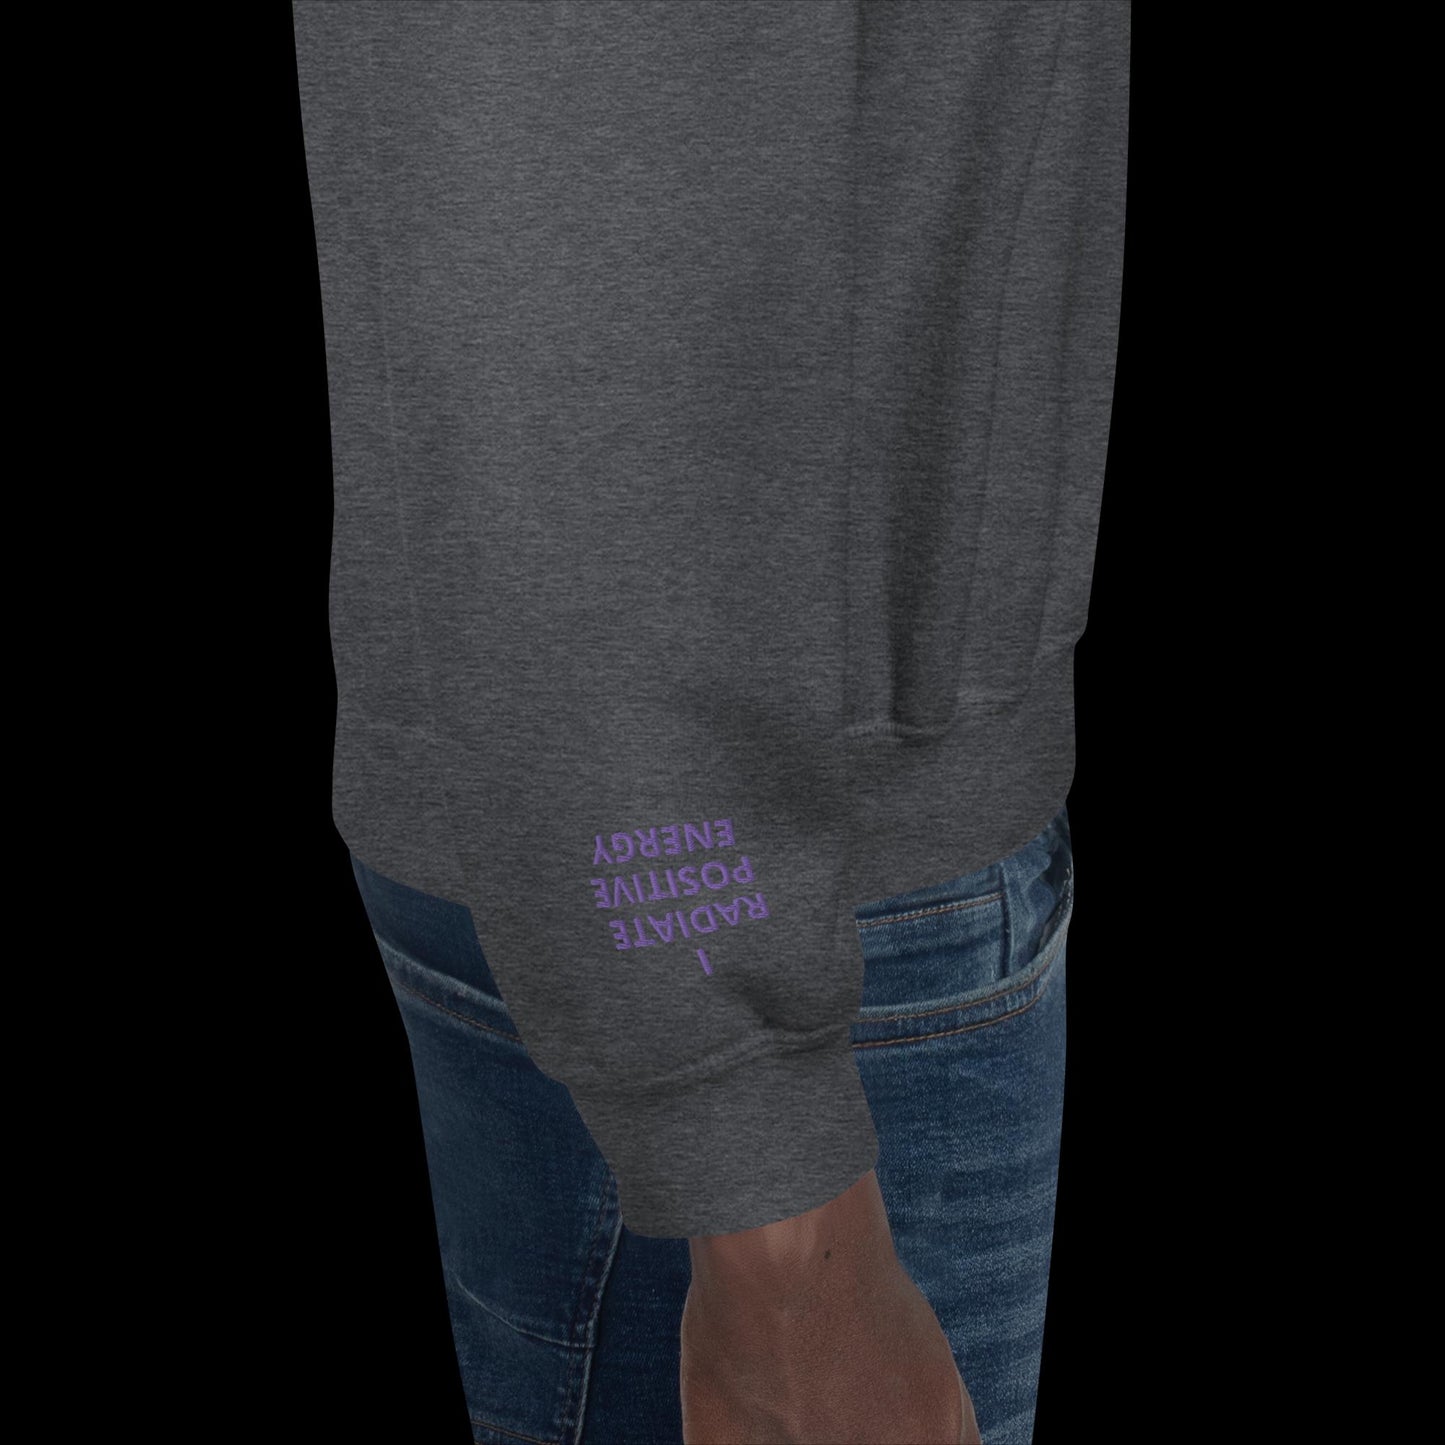 Unisex Sweatshirt - with affirmations on the wrists.